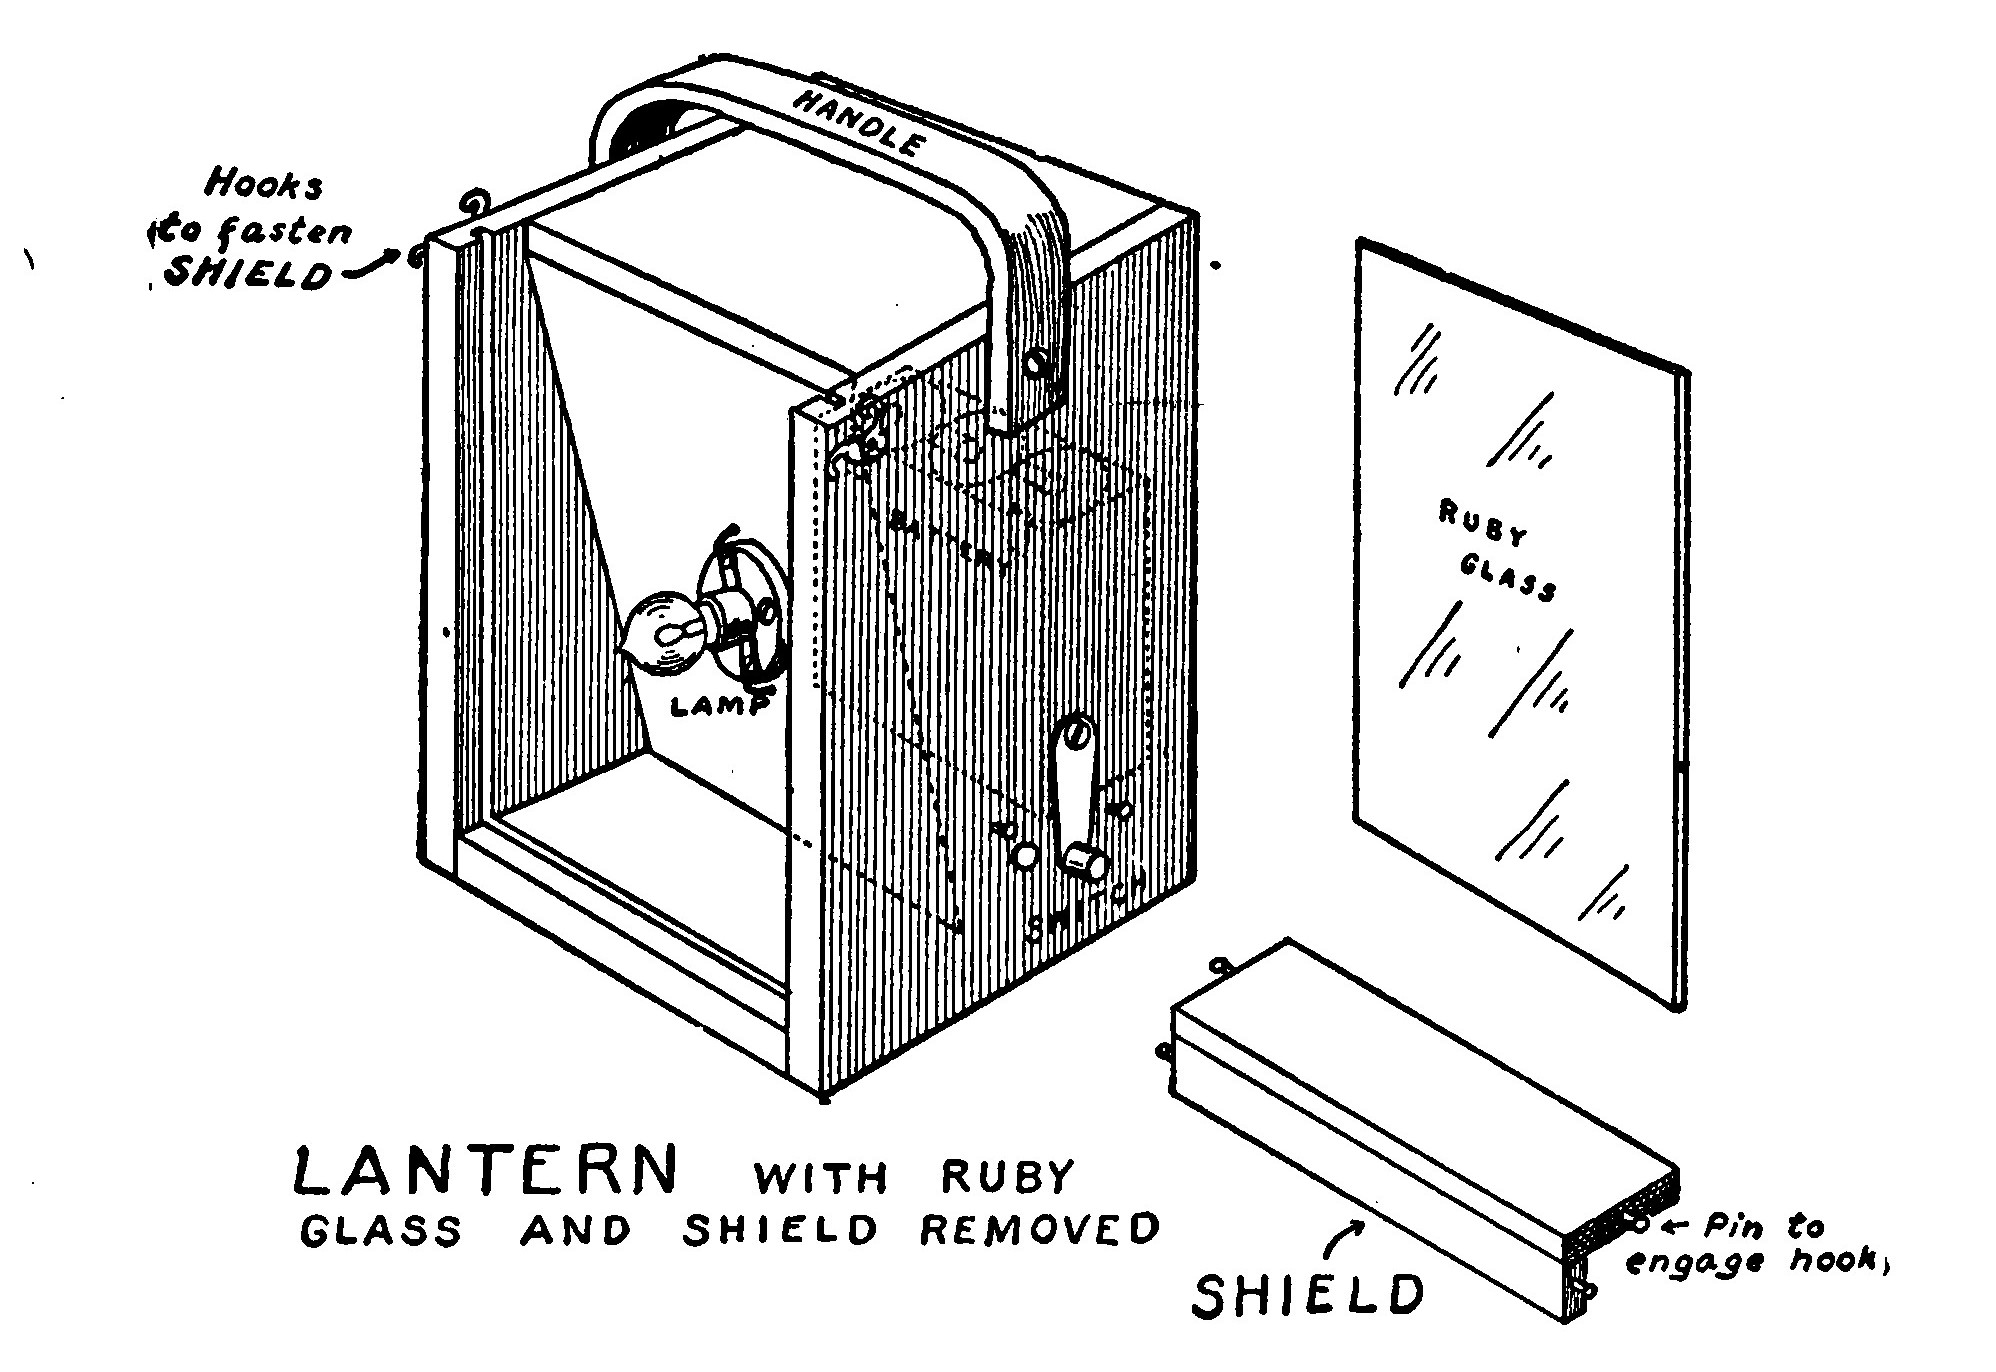 Fig. 297.—The Electric Ruby Lamp with Glass and Shield Removed.